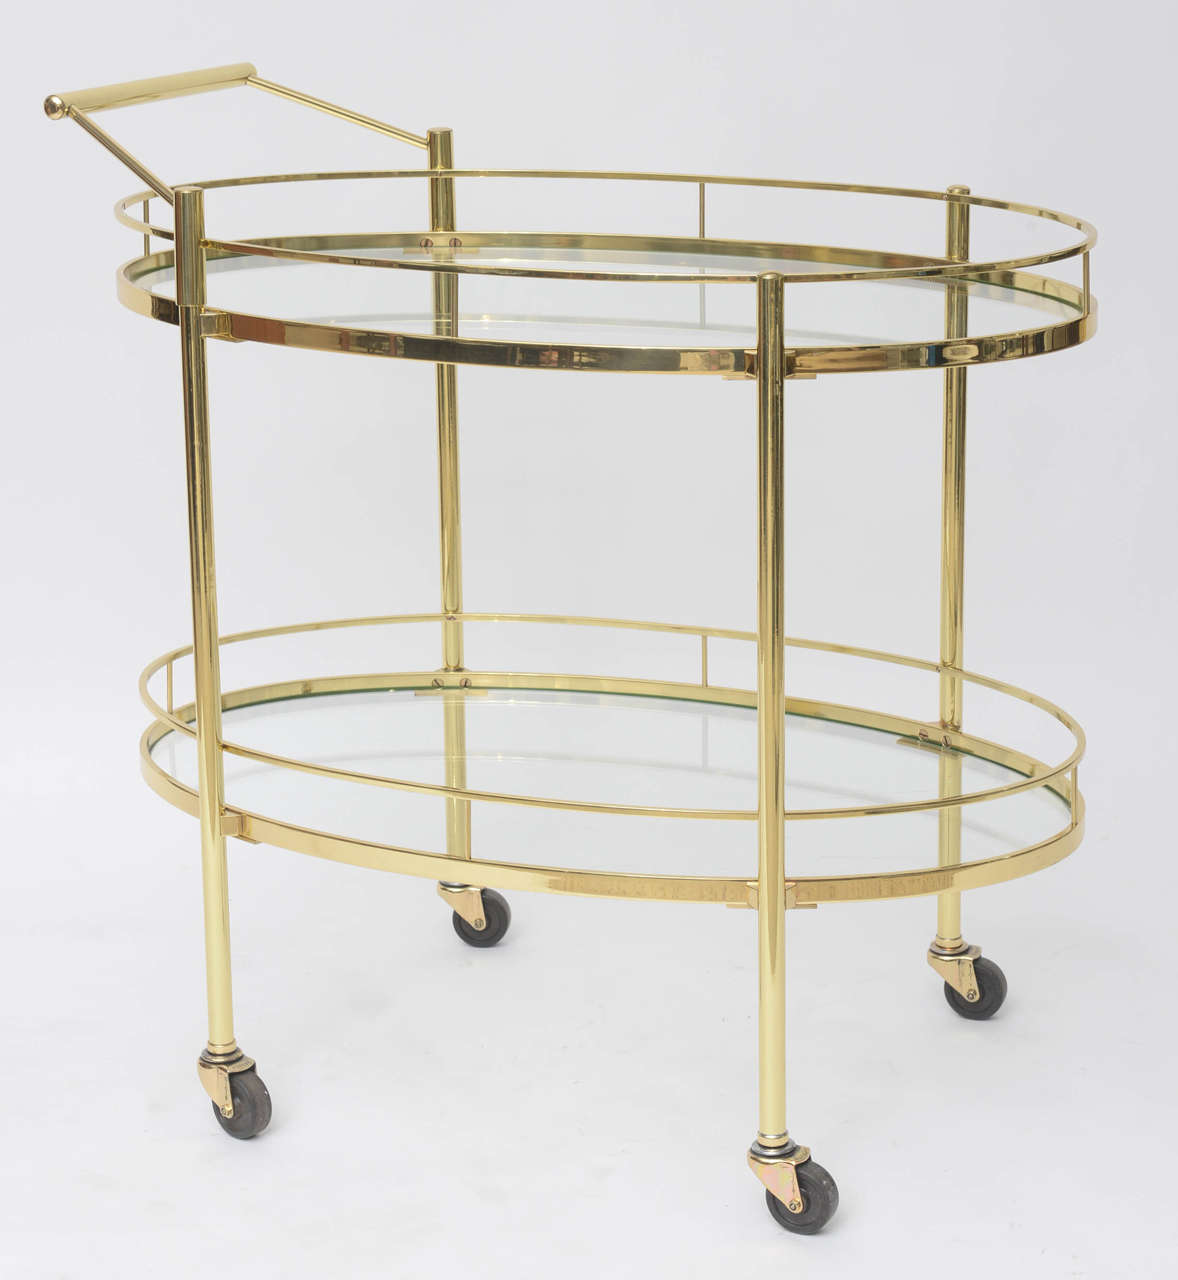 1960s French drinks trolley in solid brass. Professionally polished and lacquered.